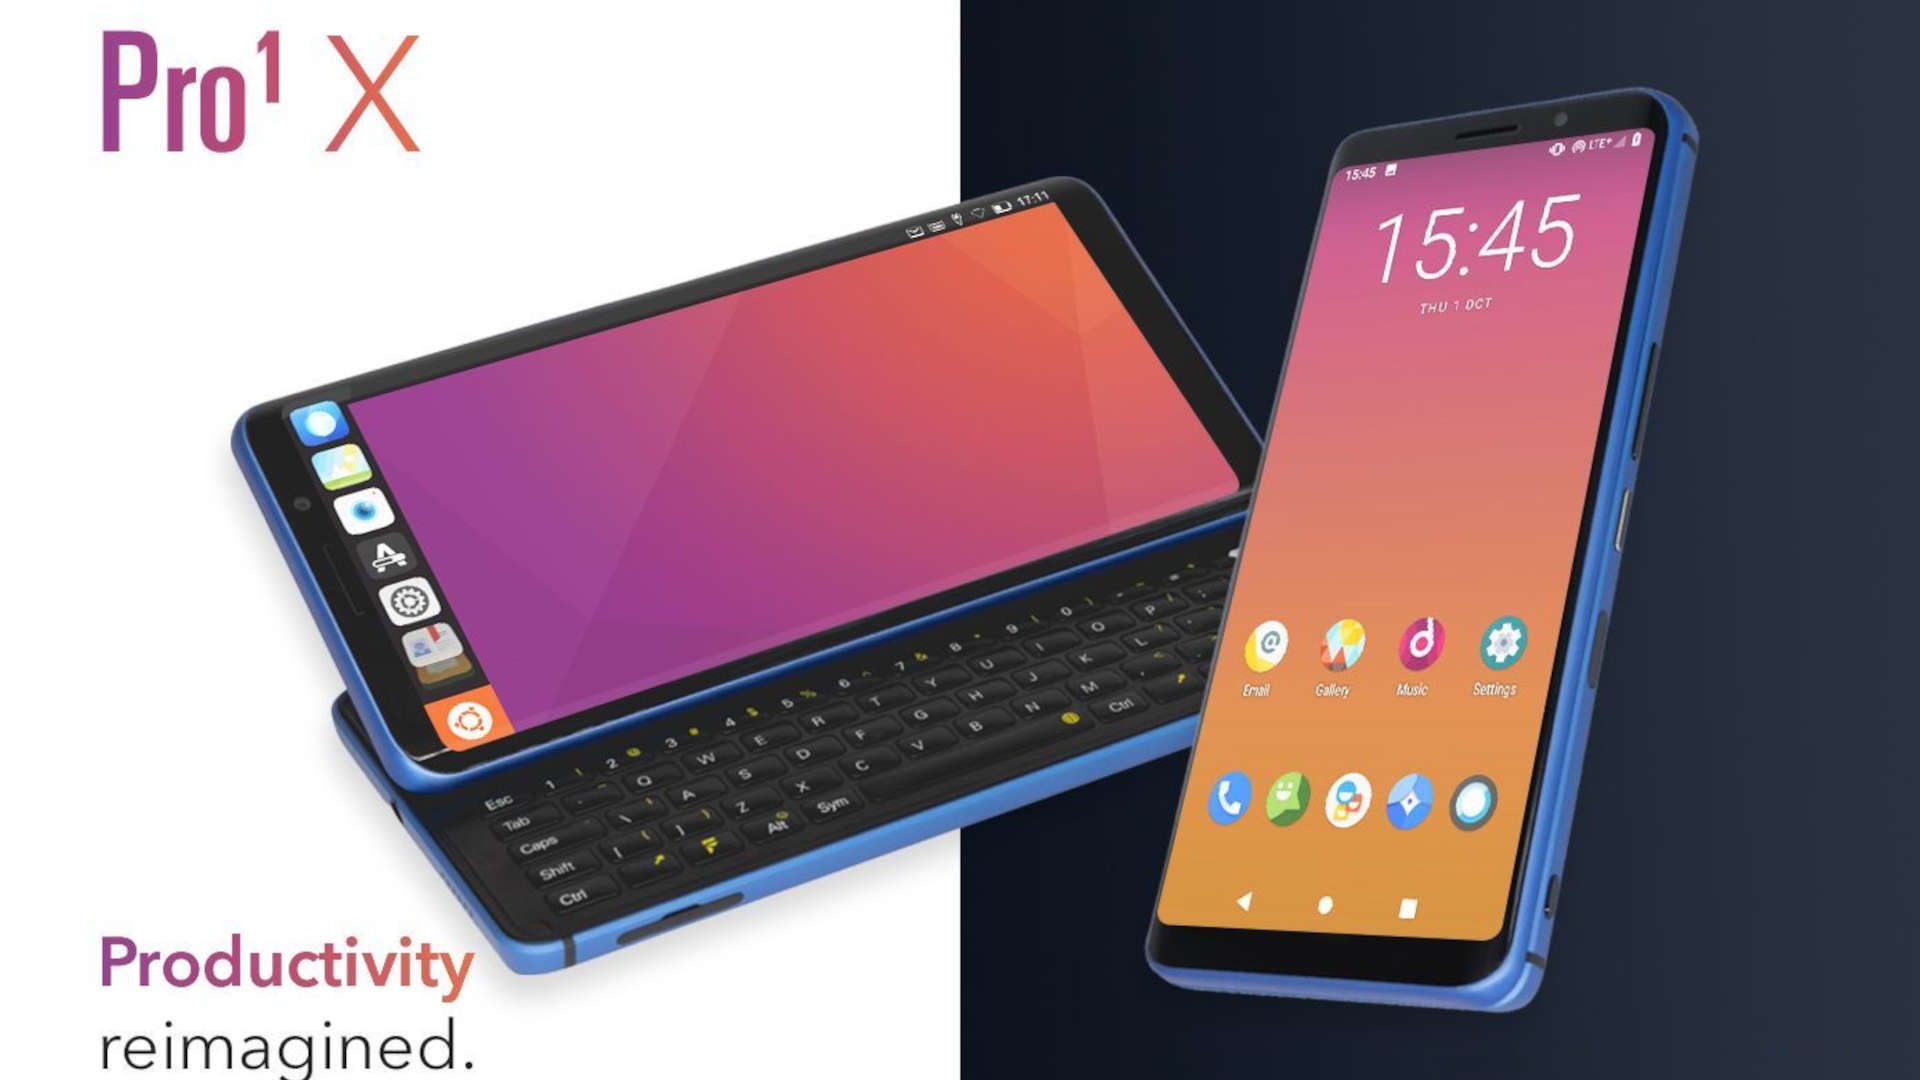 F (x) tec Pro1-X is the crazy phone with QWERTY slider keyboard